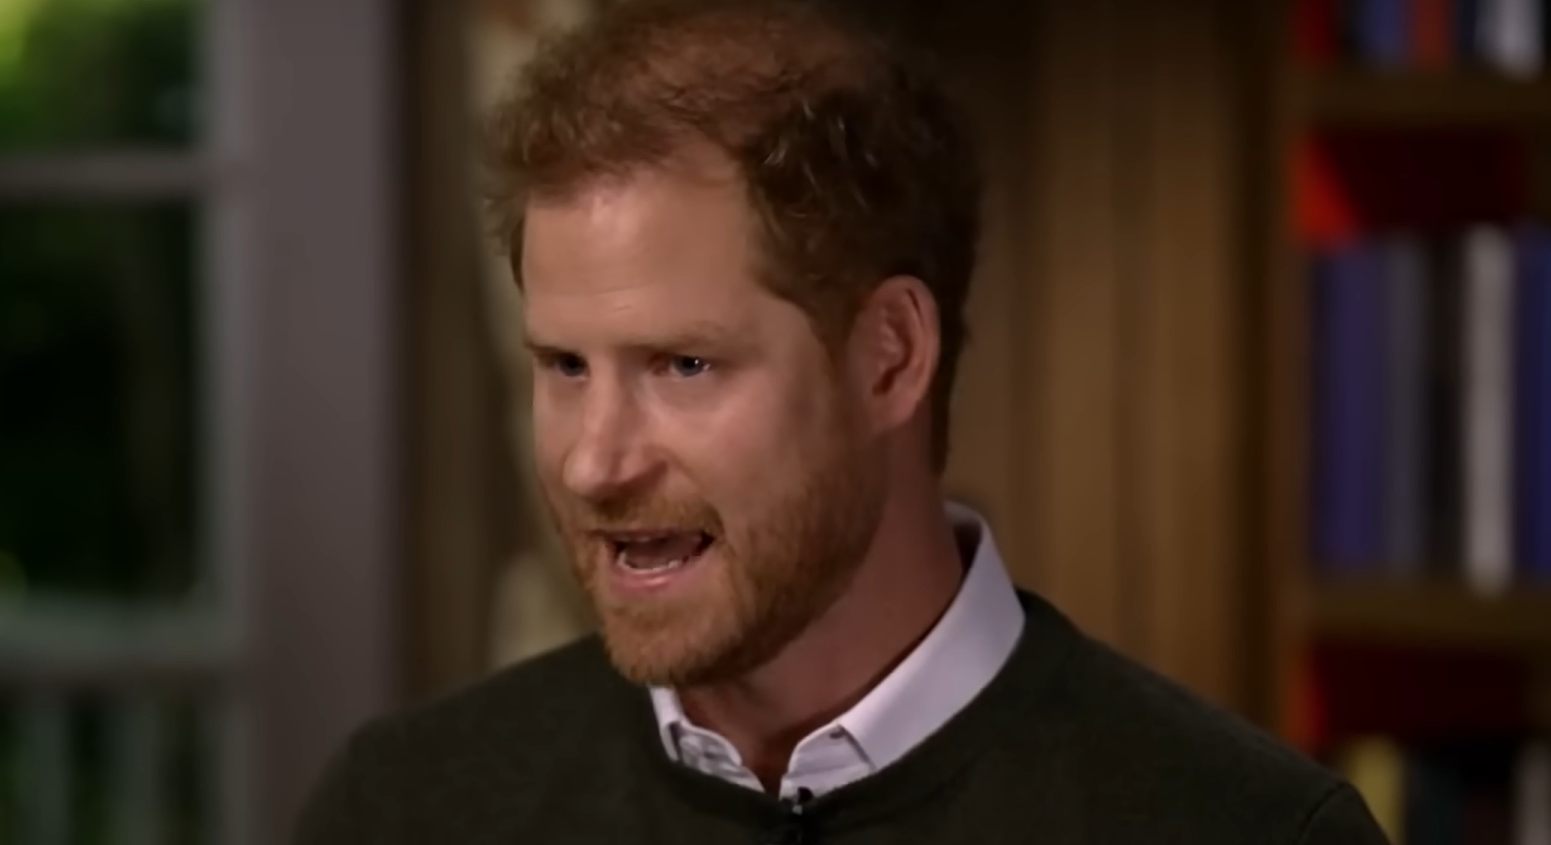 prince-william-prince-harry-revelation-royal-expert-claims-king-charles-sons-have-not-spoken-relationship-still-strained-ahead-of-coronation